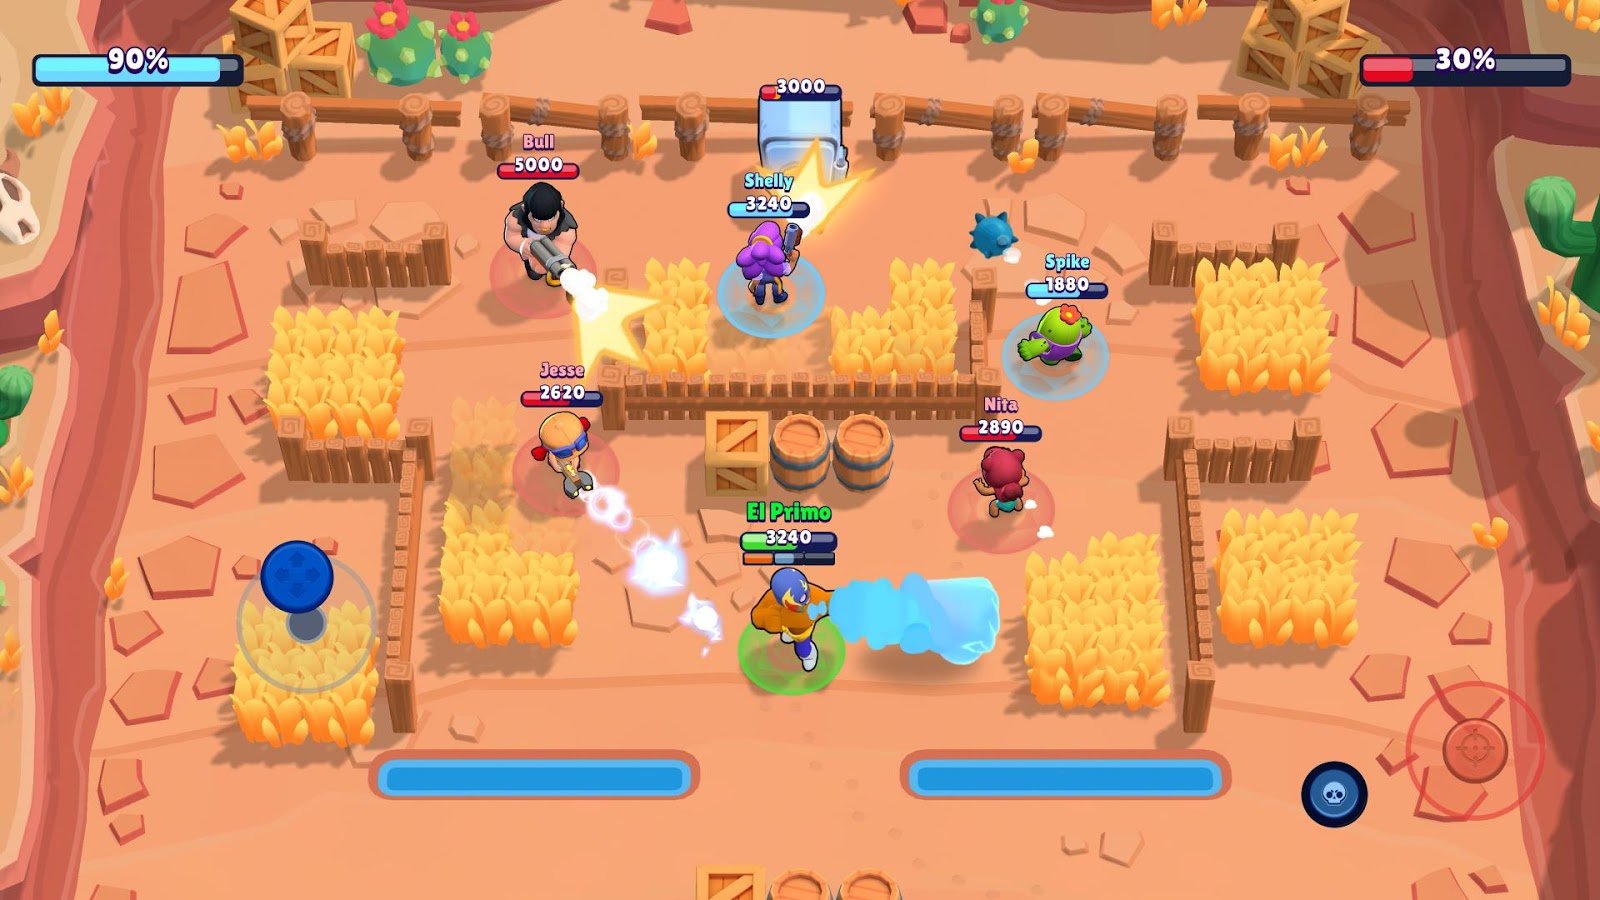 Brawl Stars Is Bite Sized Fun That Strips Away Too Much To Be Great South China Morning Post - gamewith brawl stars